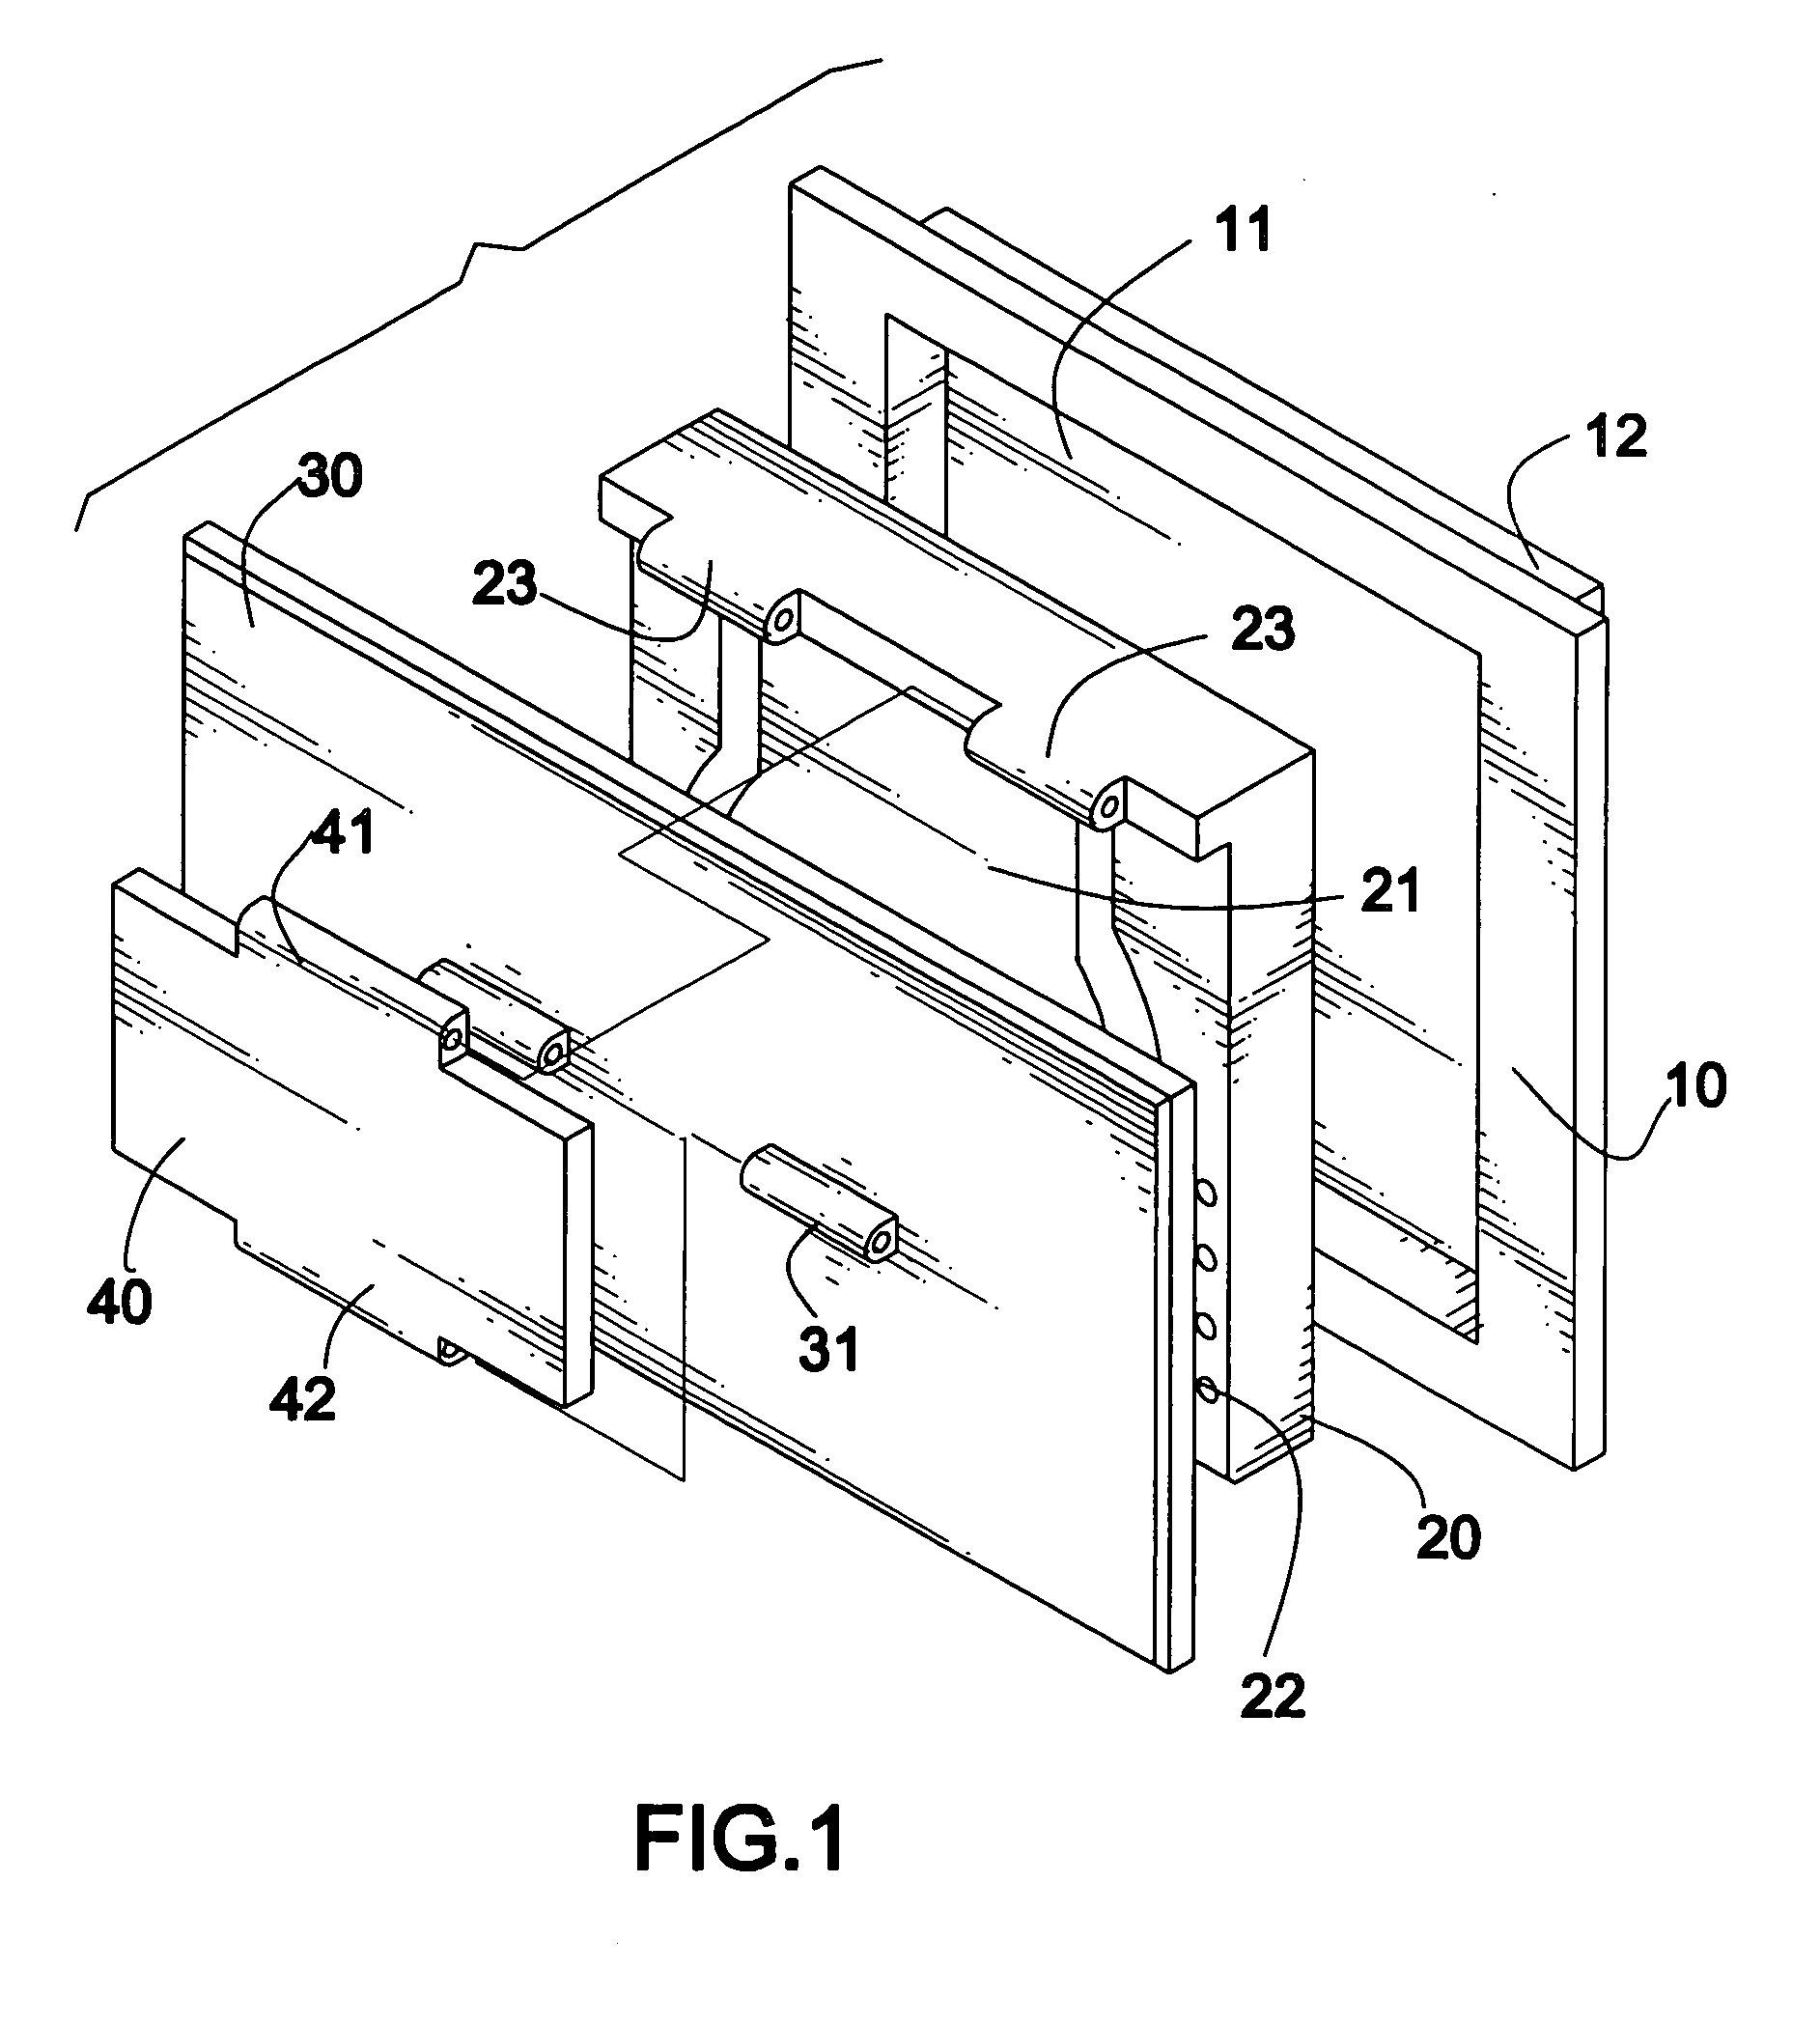 In-vehicle video/audio display device